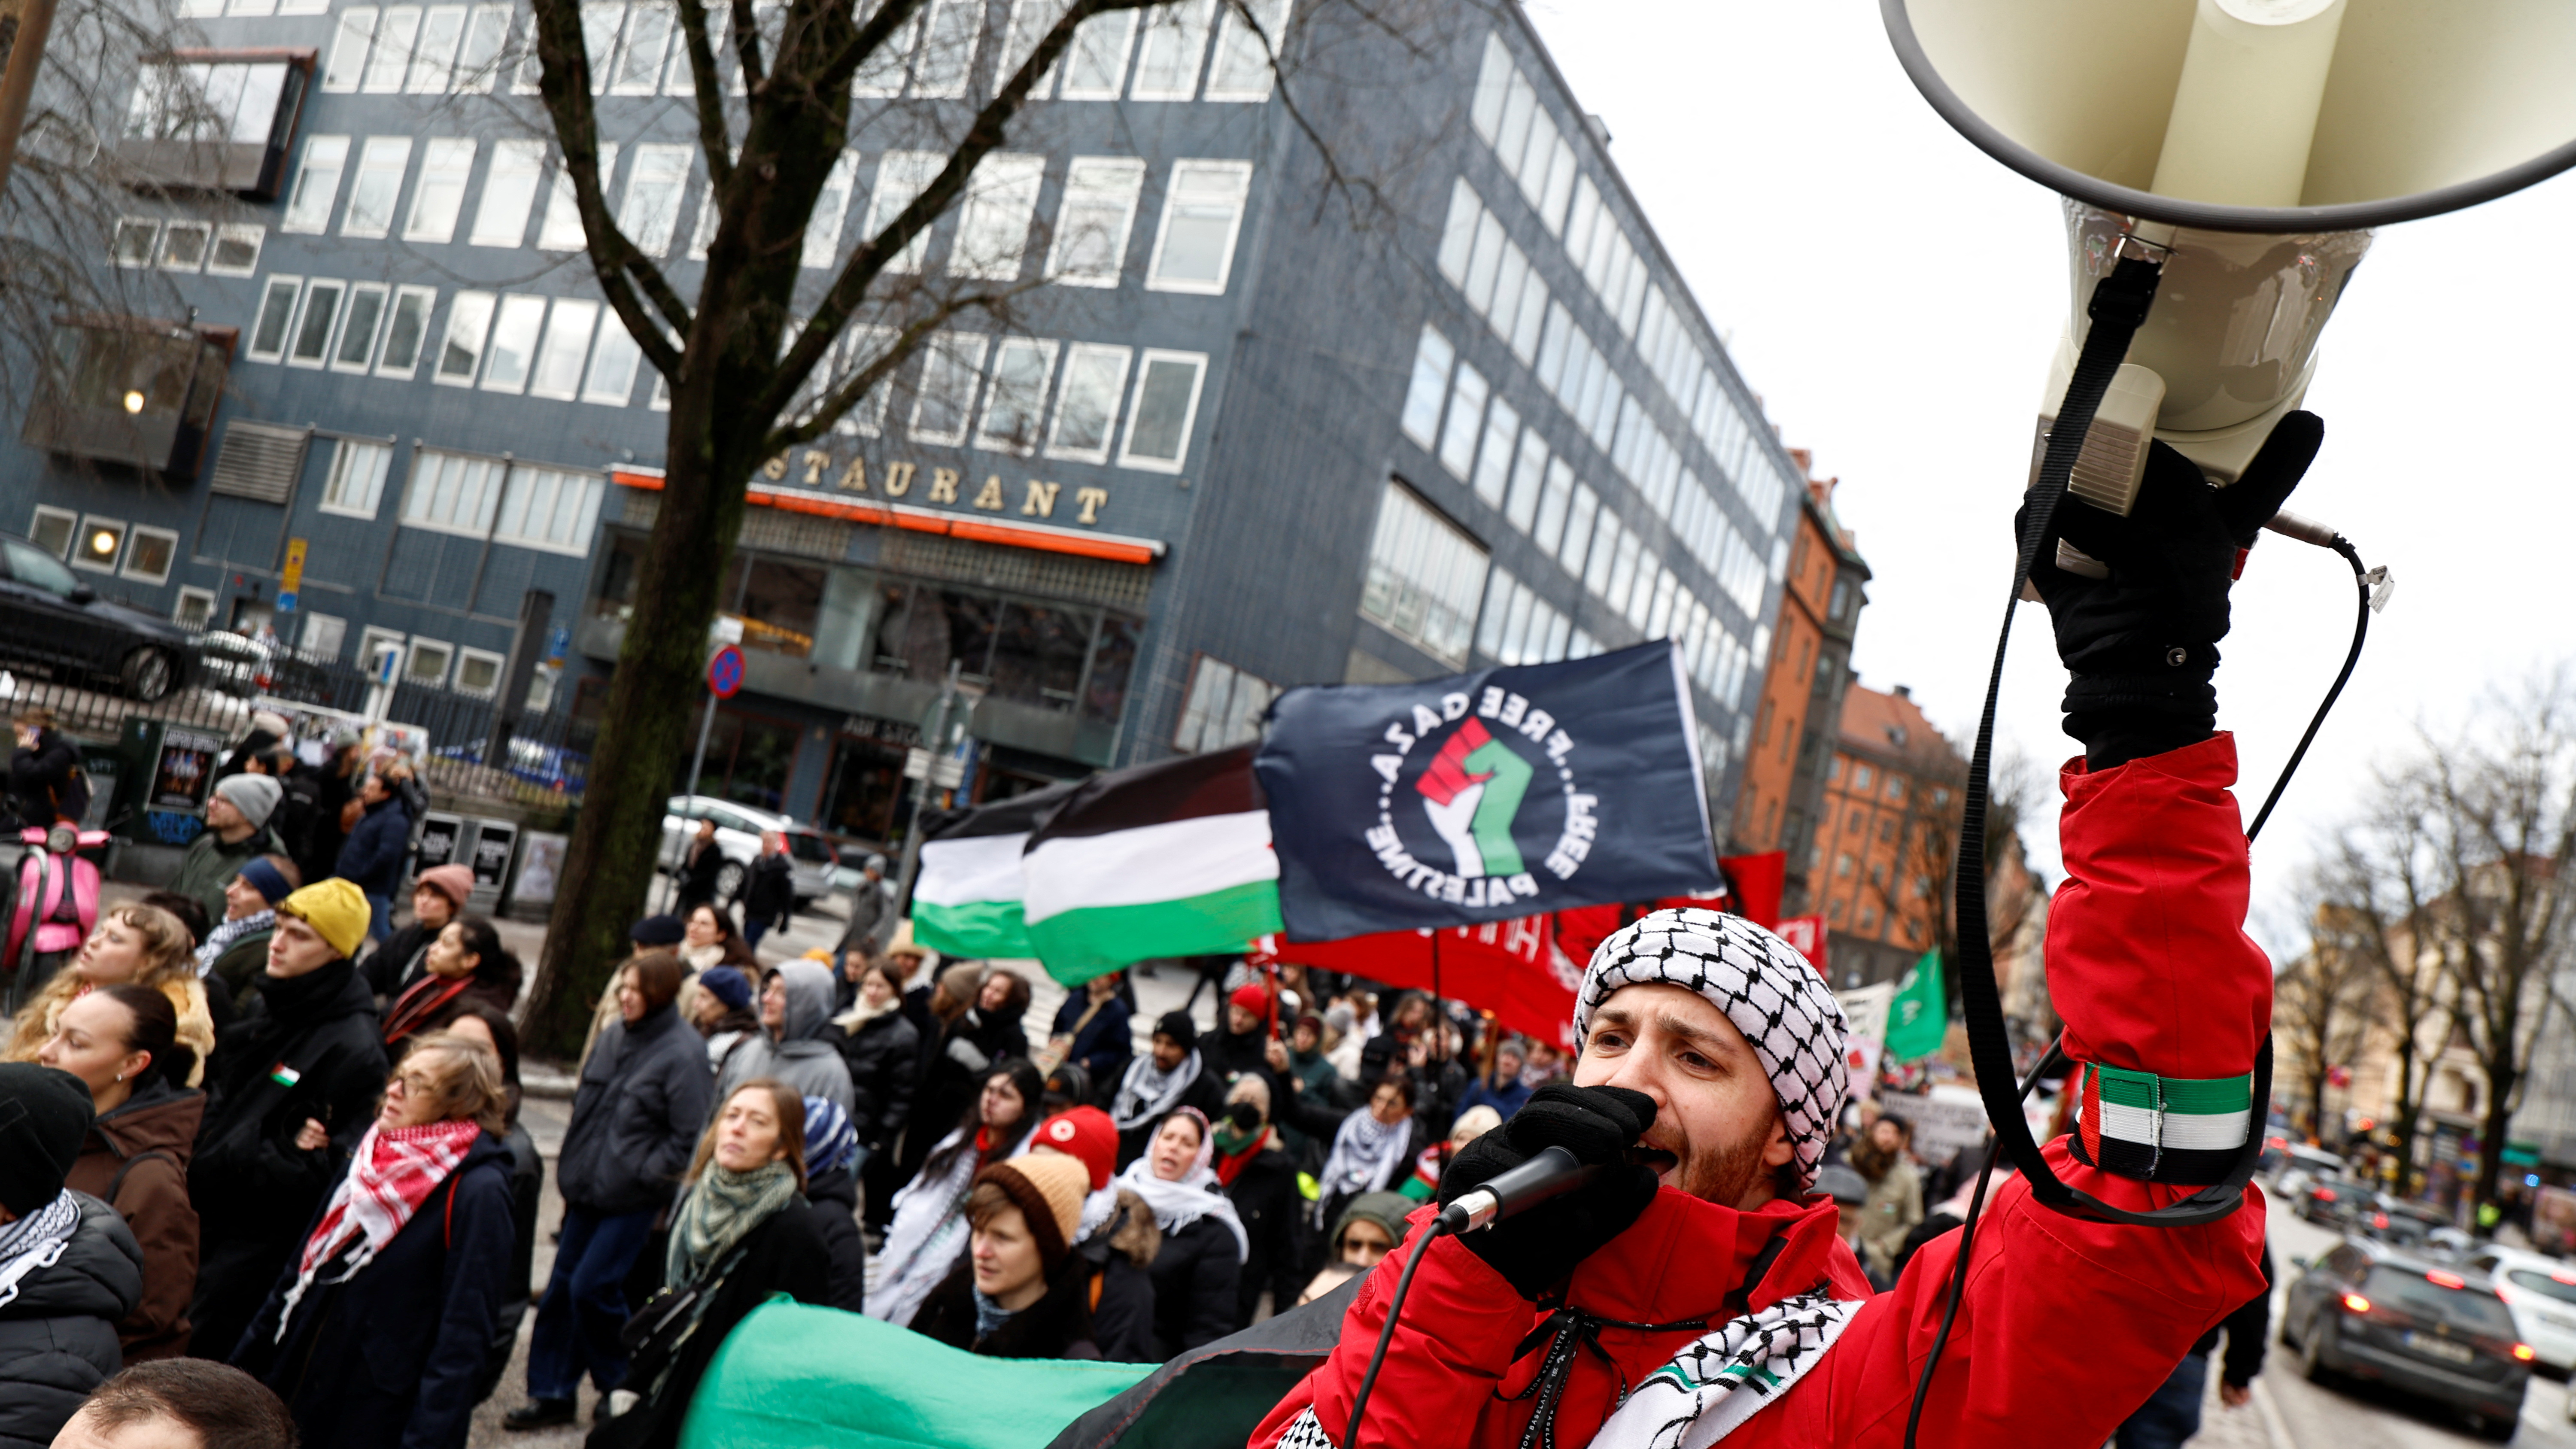 Protesters take part in a demonstration organized by 'Together for Palestine' to demand a ceasefire and exclude Israel from the Eurovision Song Contest, in Stockholm, Sweden. /Fredrik Persson/Reuters